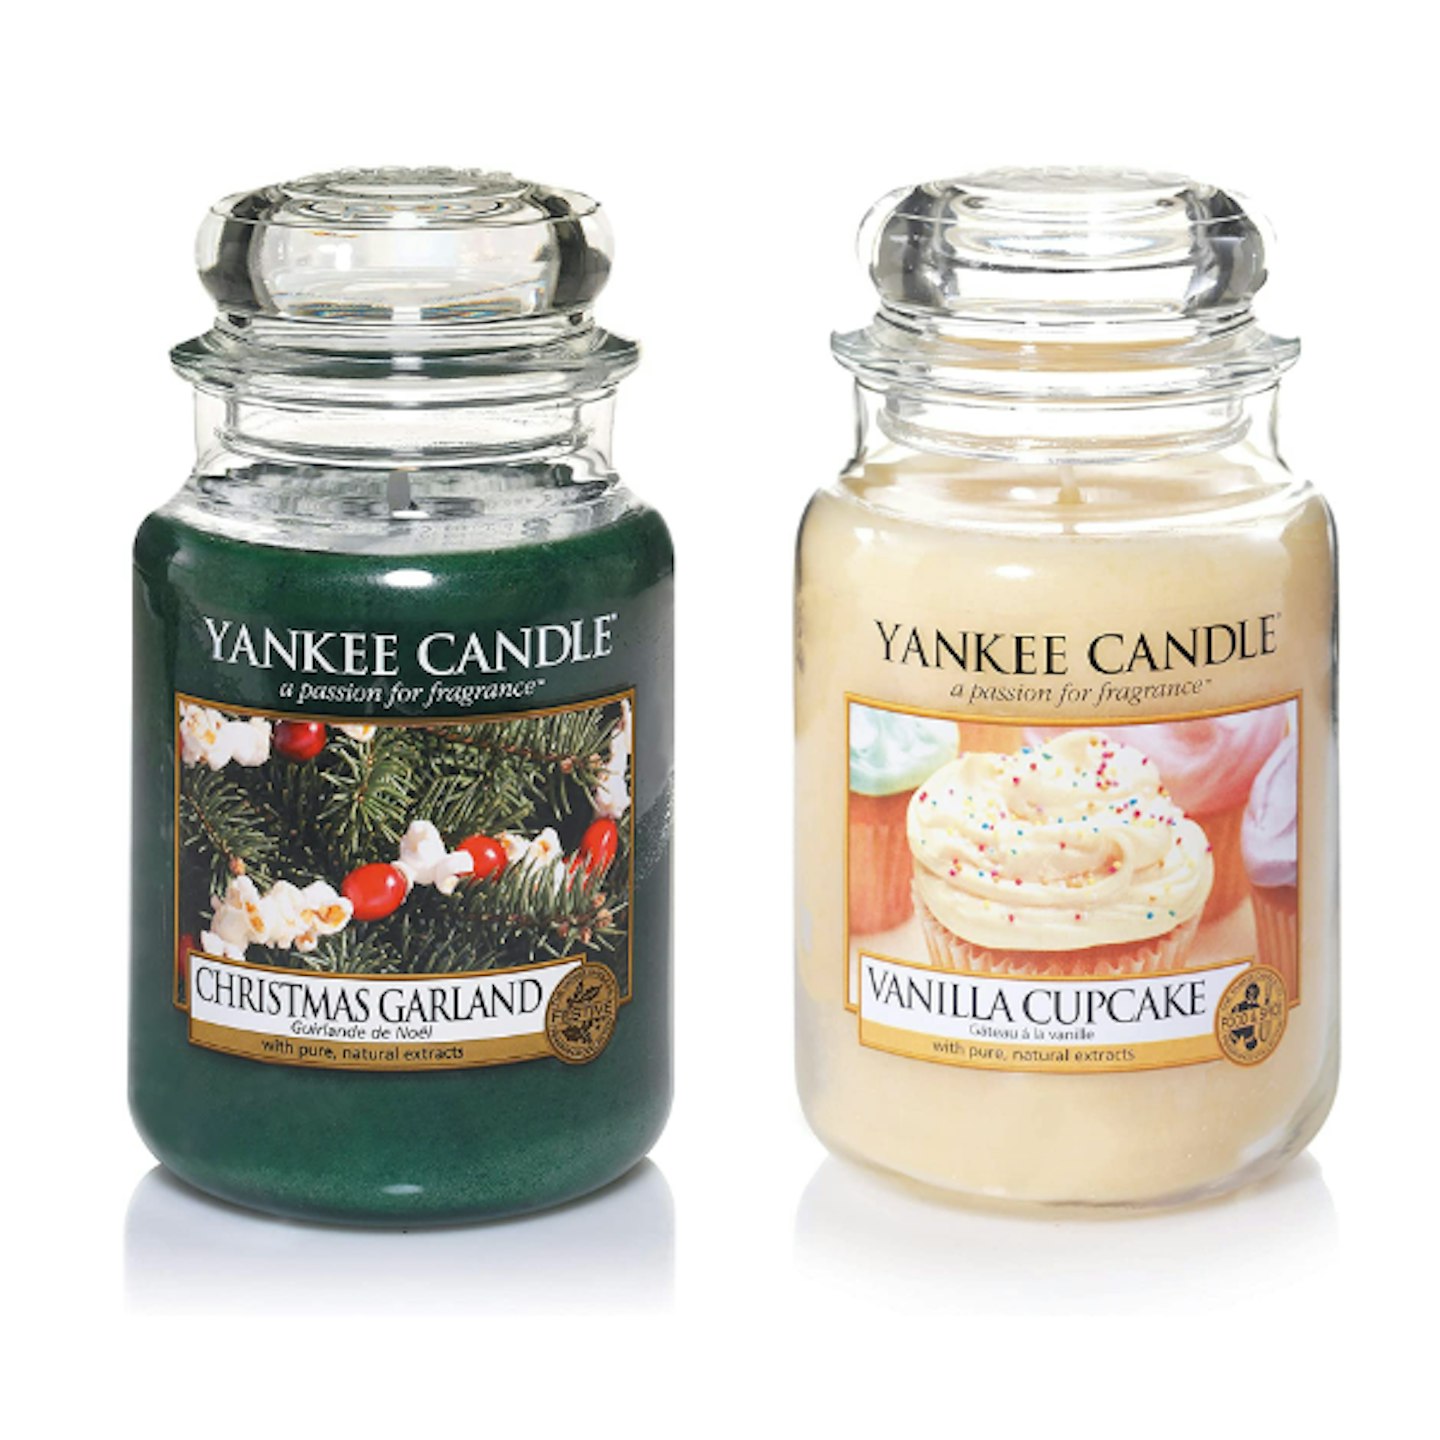 Up to 25% off Yankee Candle